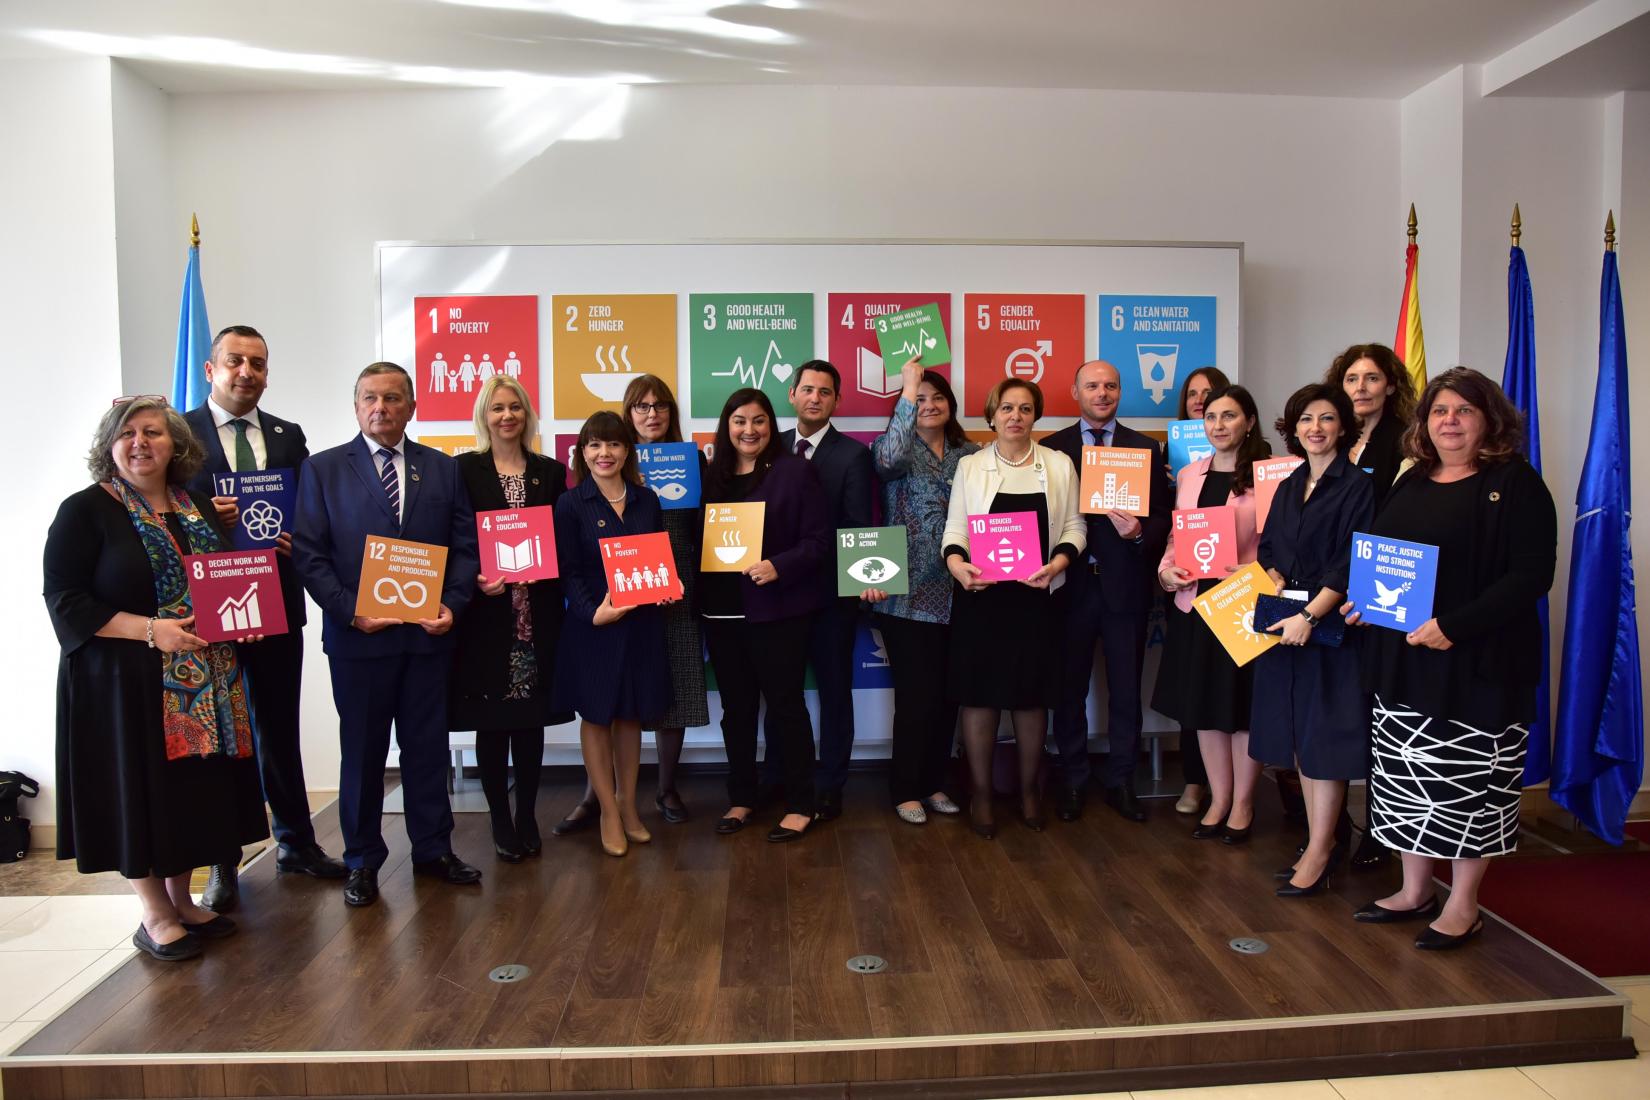 Photo from the celebration of UN Day 2019 including most of the UN Country Team and representatives from the Government